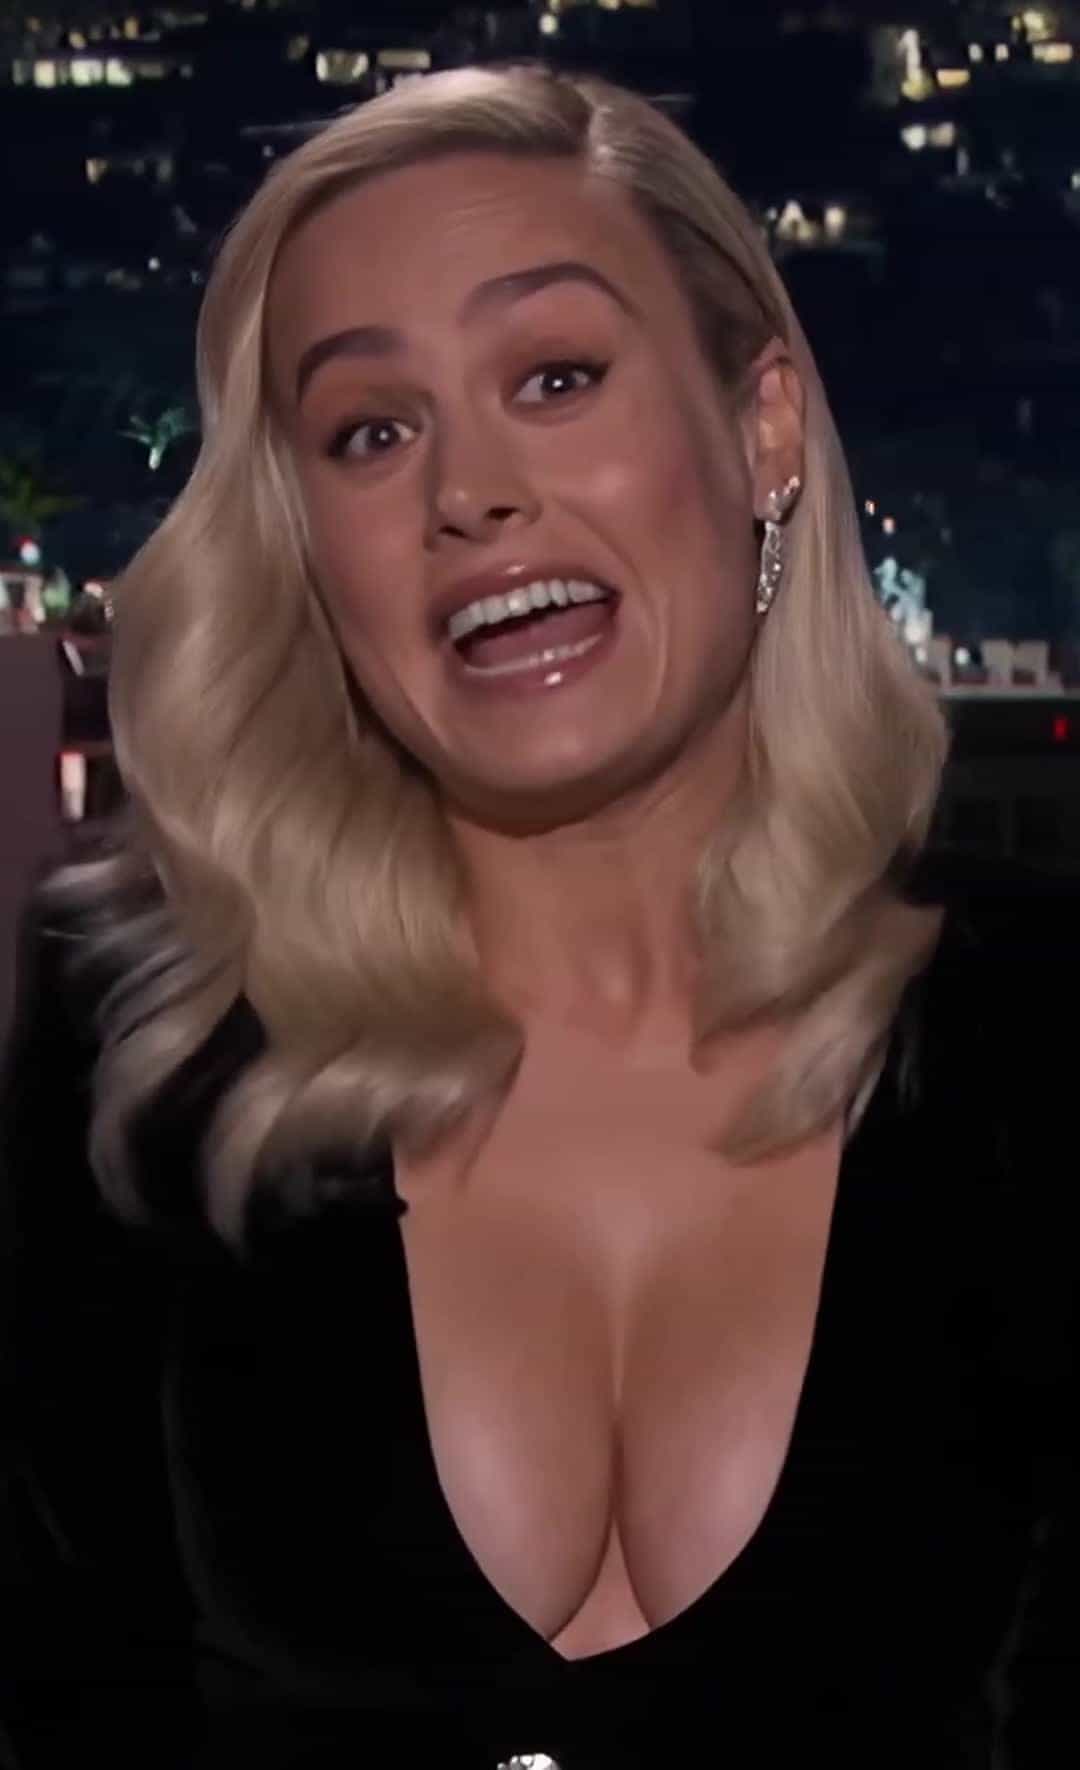 Every time I see Brie Larsons tits in that black dress I have to jerk